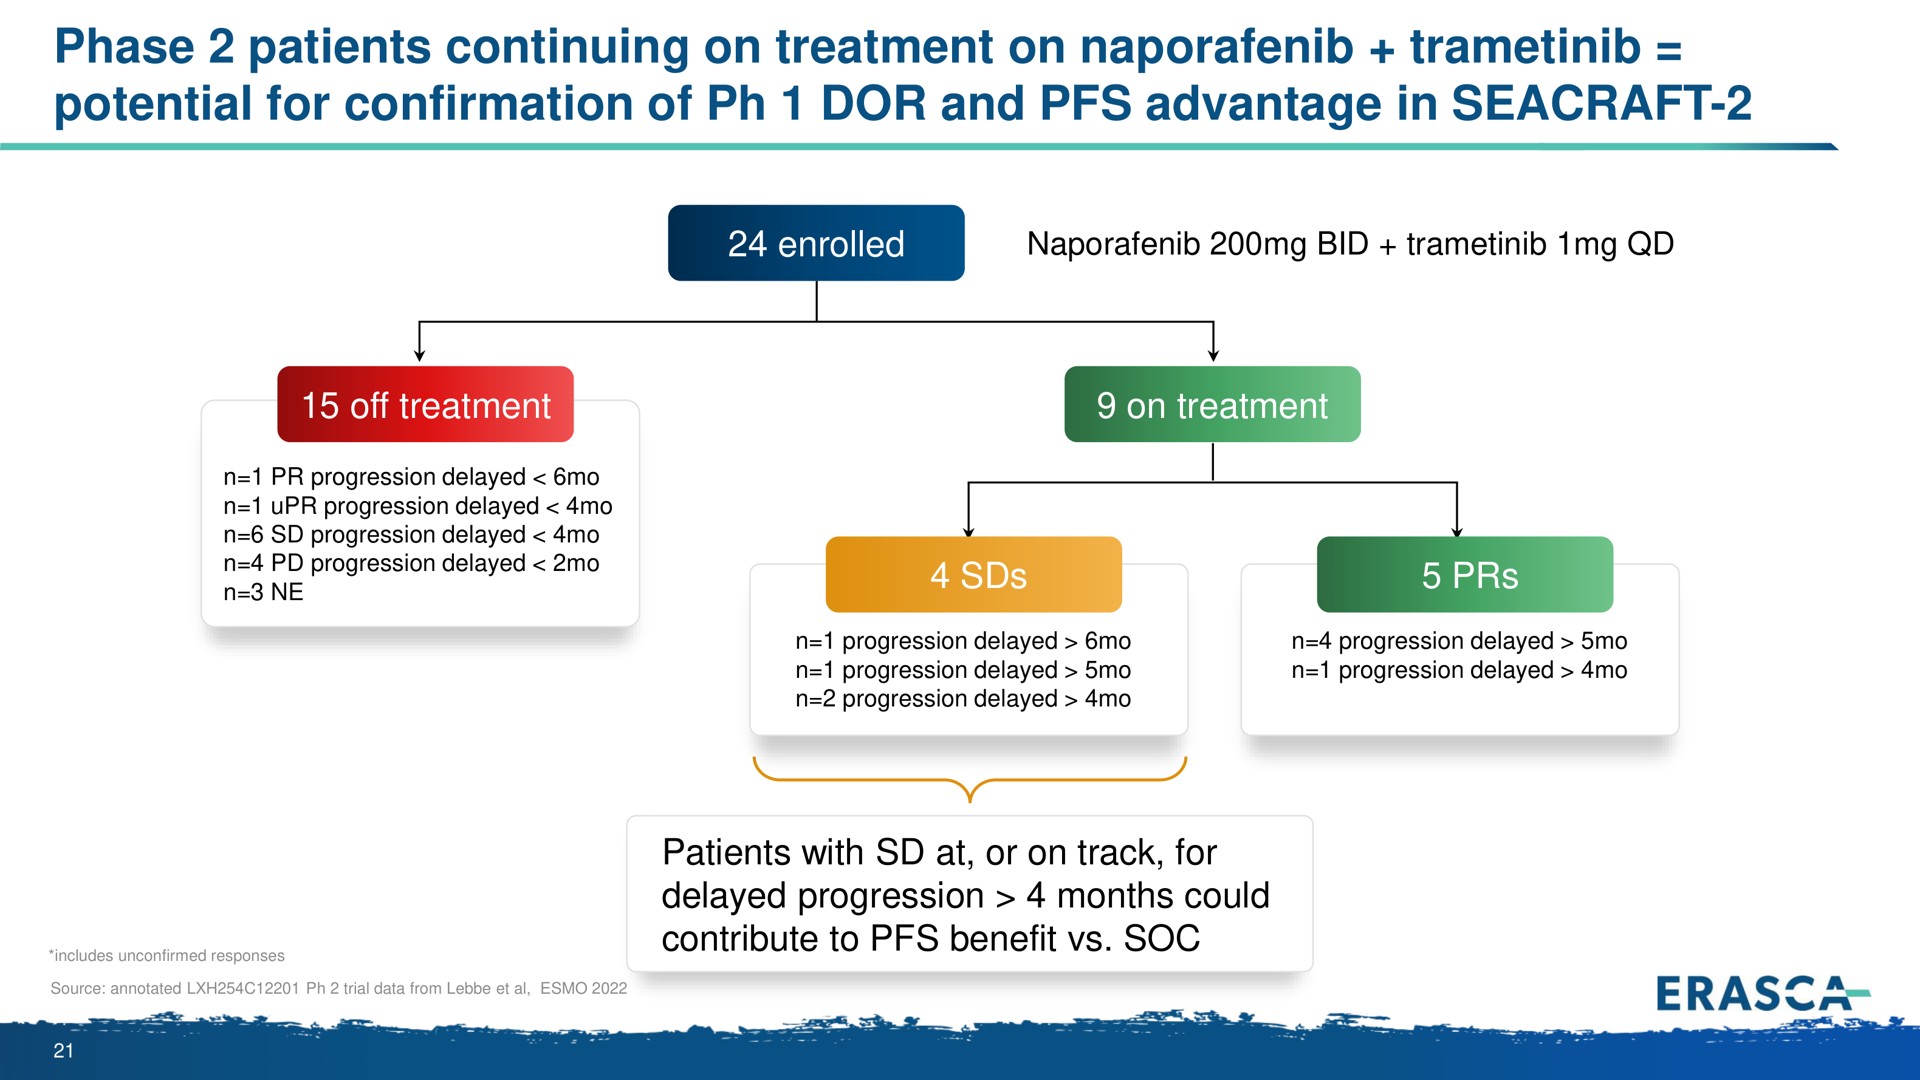 phase patients continuing on treatment on potential for confirmation of dor and advantage in seacraft | Erasca